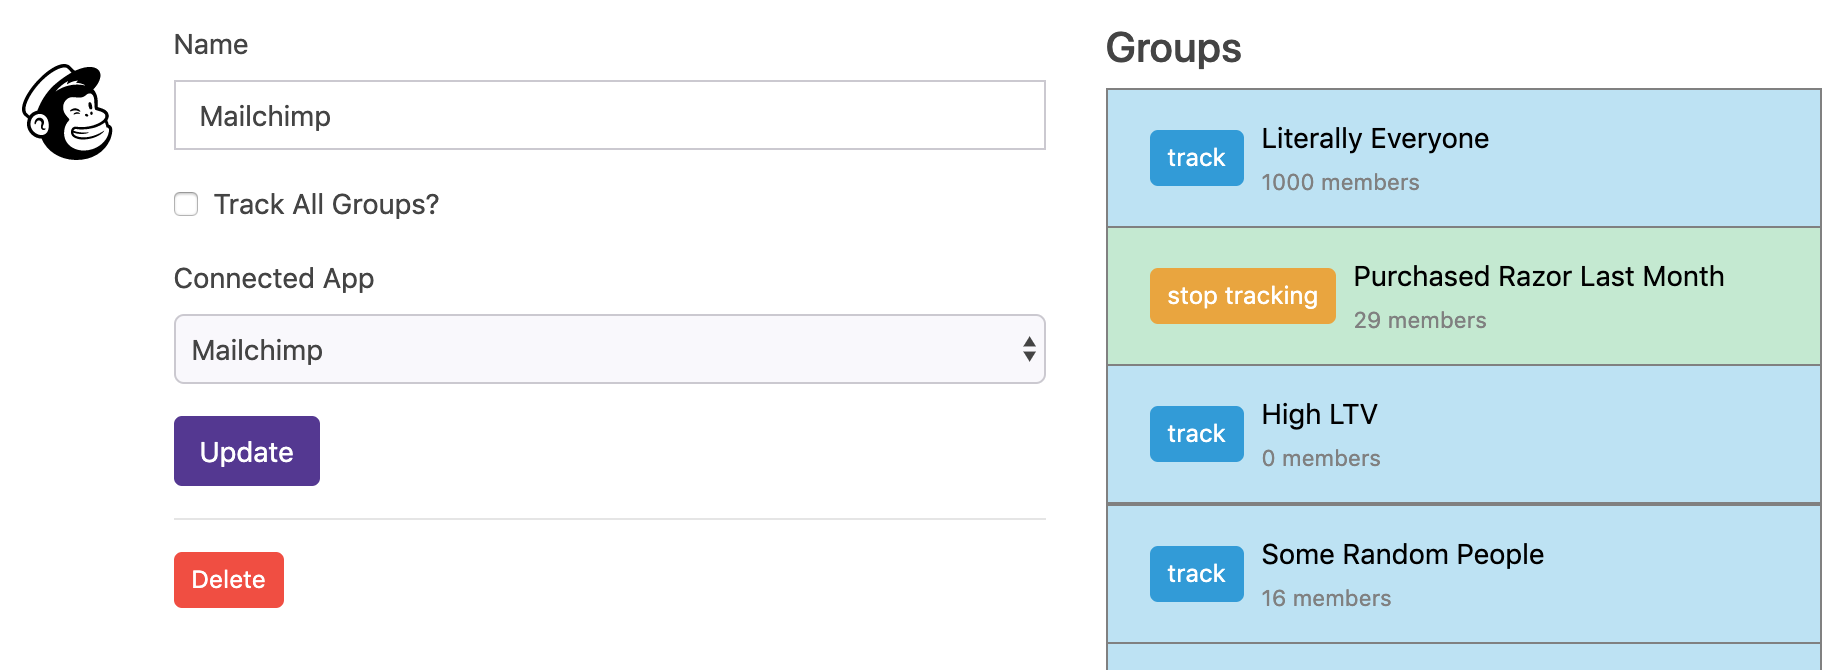 Grouparoo lets you choose what groups to sync to your destination.